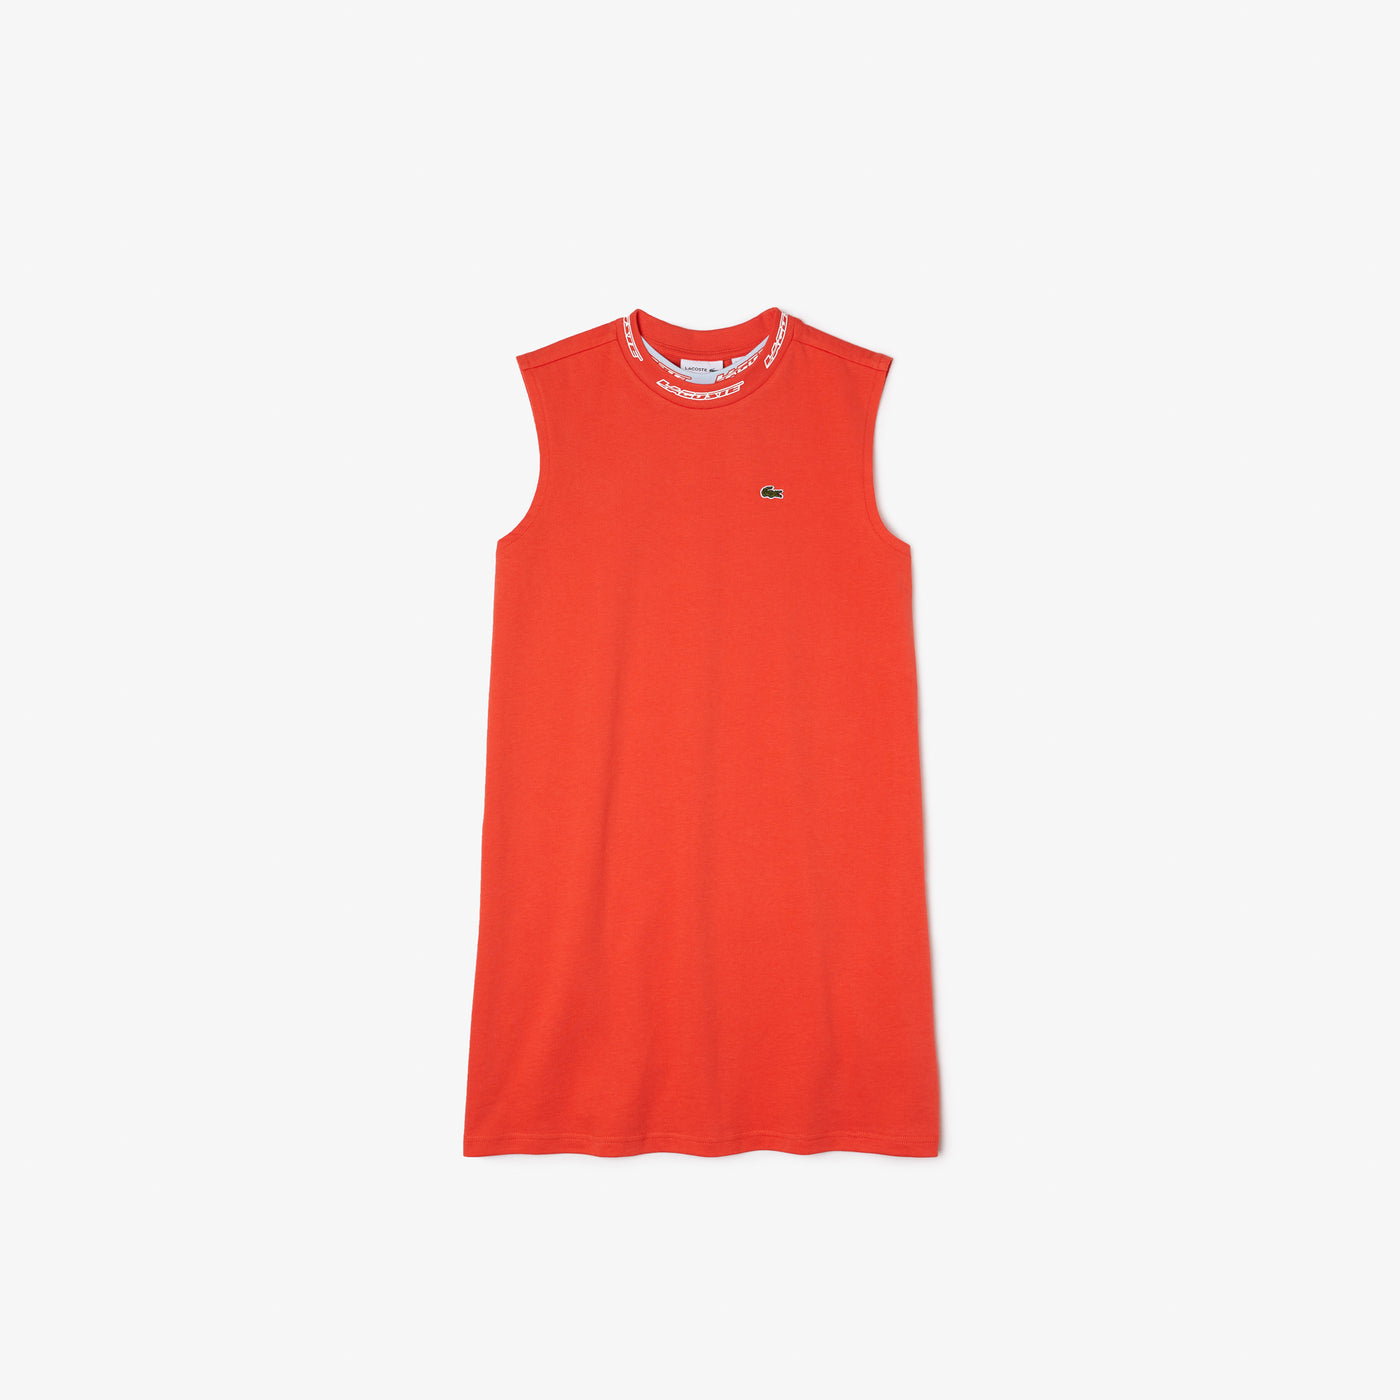 Shop The Latest Collection Of Lacoste Girls’ Lacoste Round Neck Cotton Jersey Logo T-Shirt Dress - Ej5330 In Lebanon